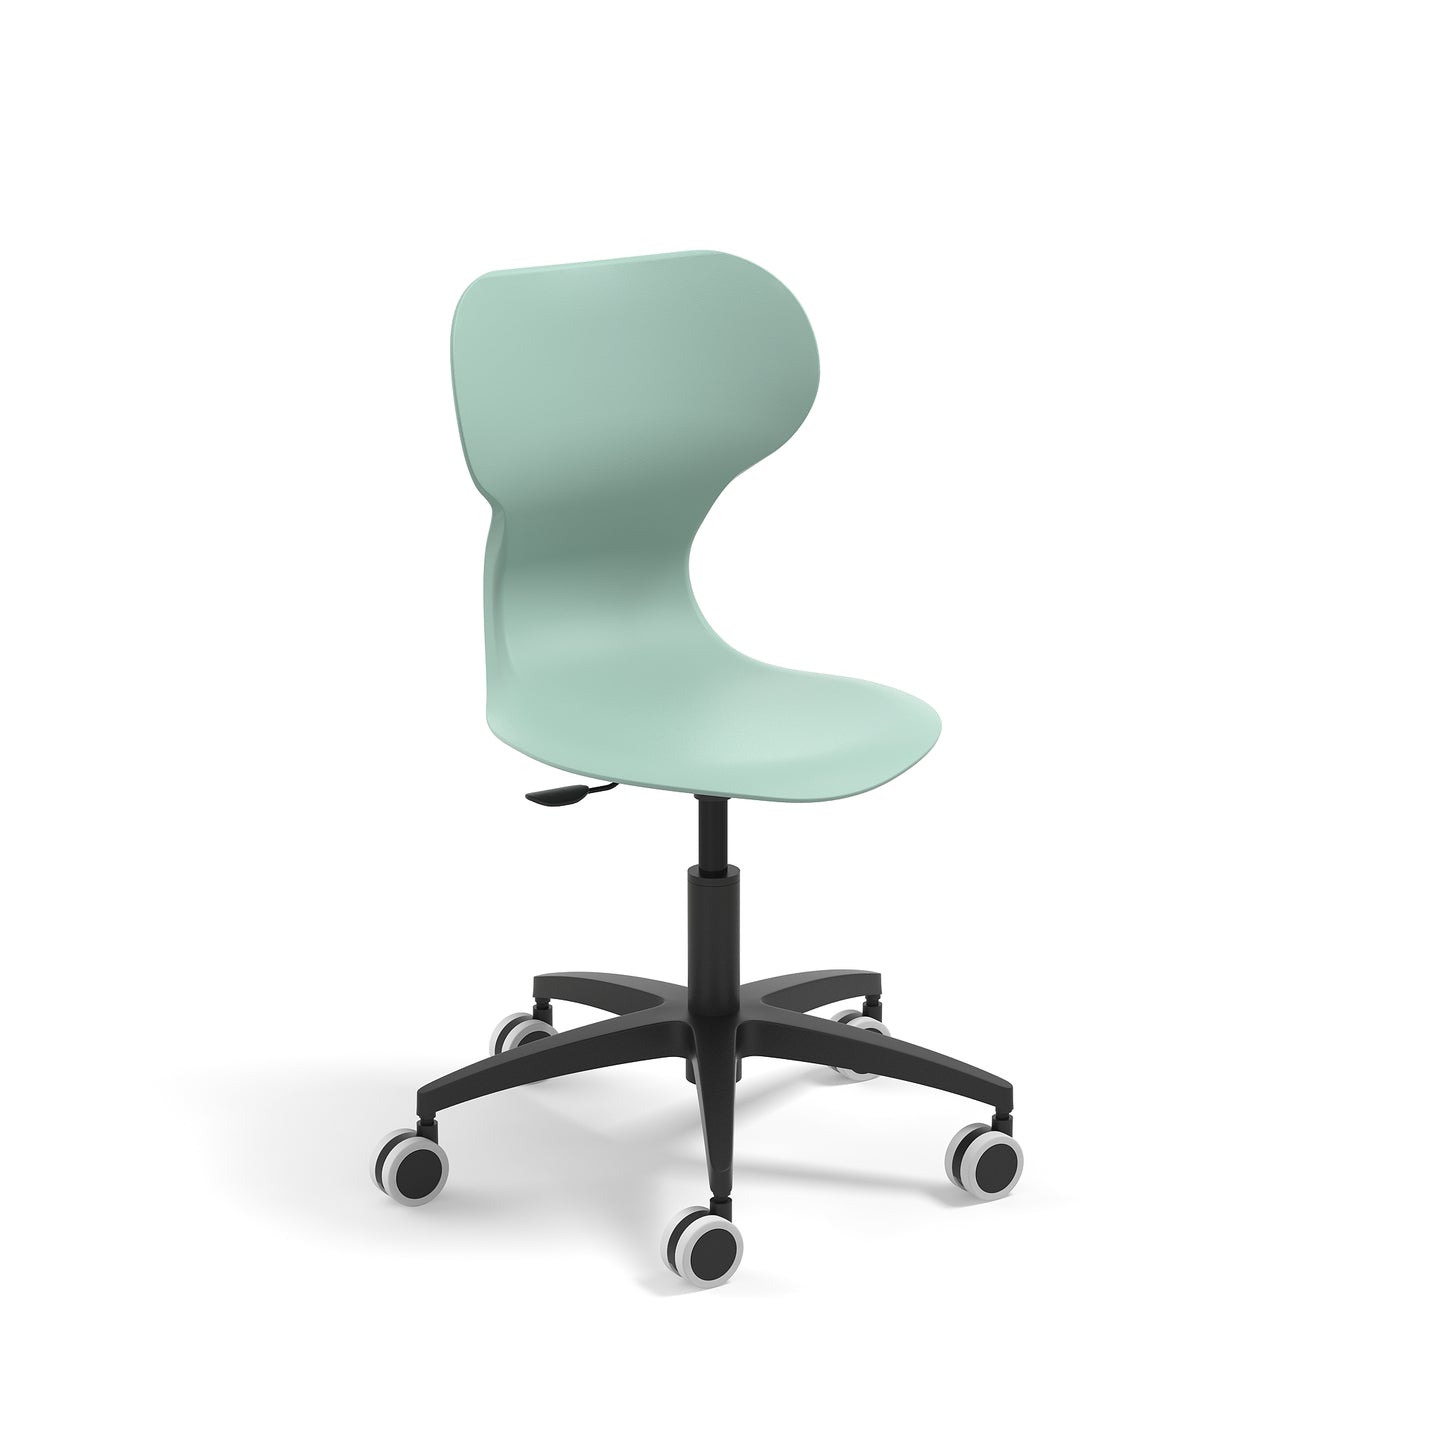 Synergy Lift Height Adjustable Wheeled Swivel Classroom Chairs